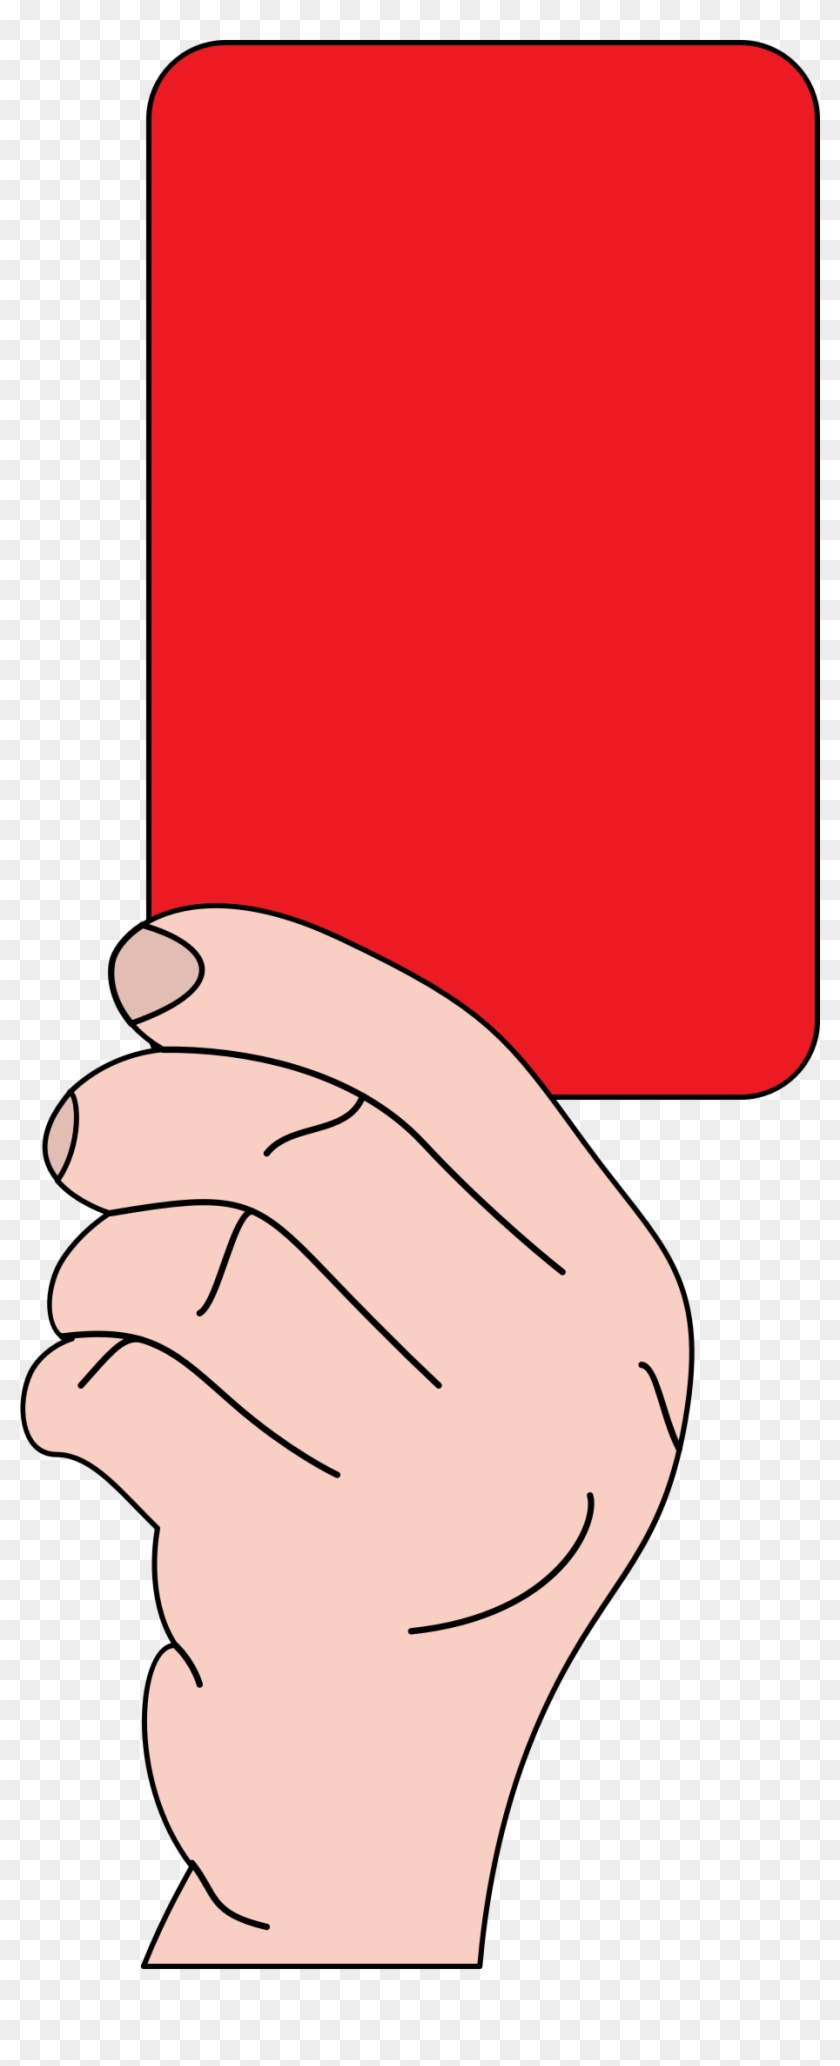 This Free Icons Png Design Of Referee Showing Red Card Clipart #1169113